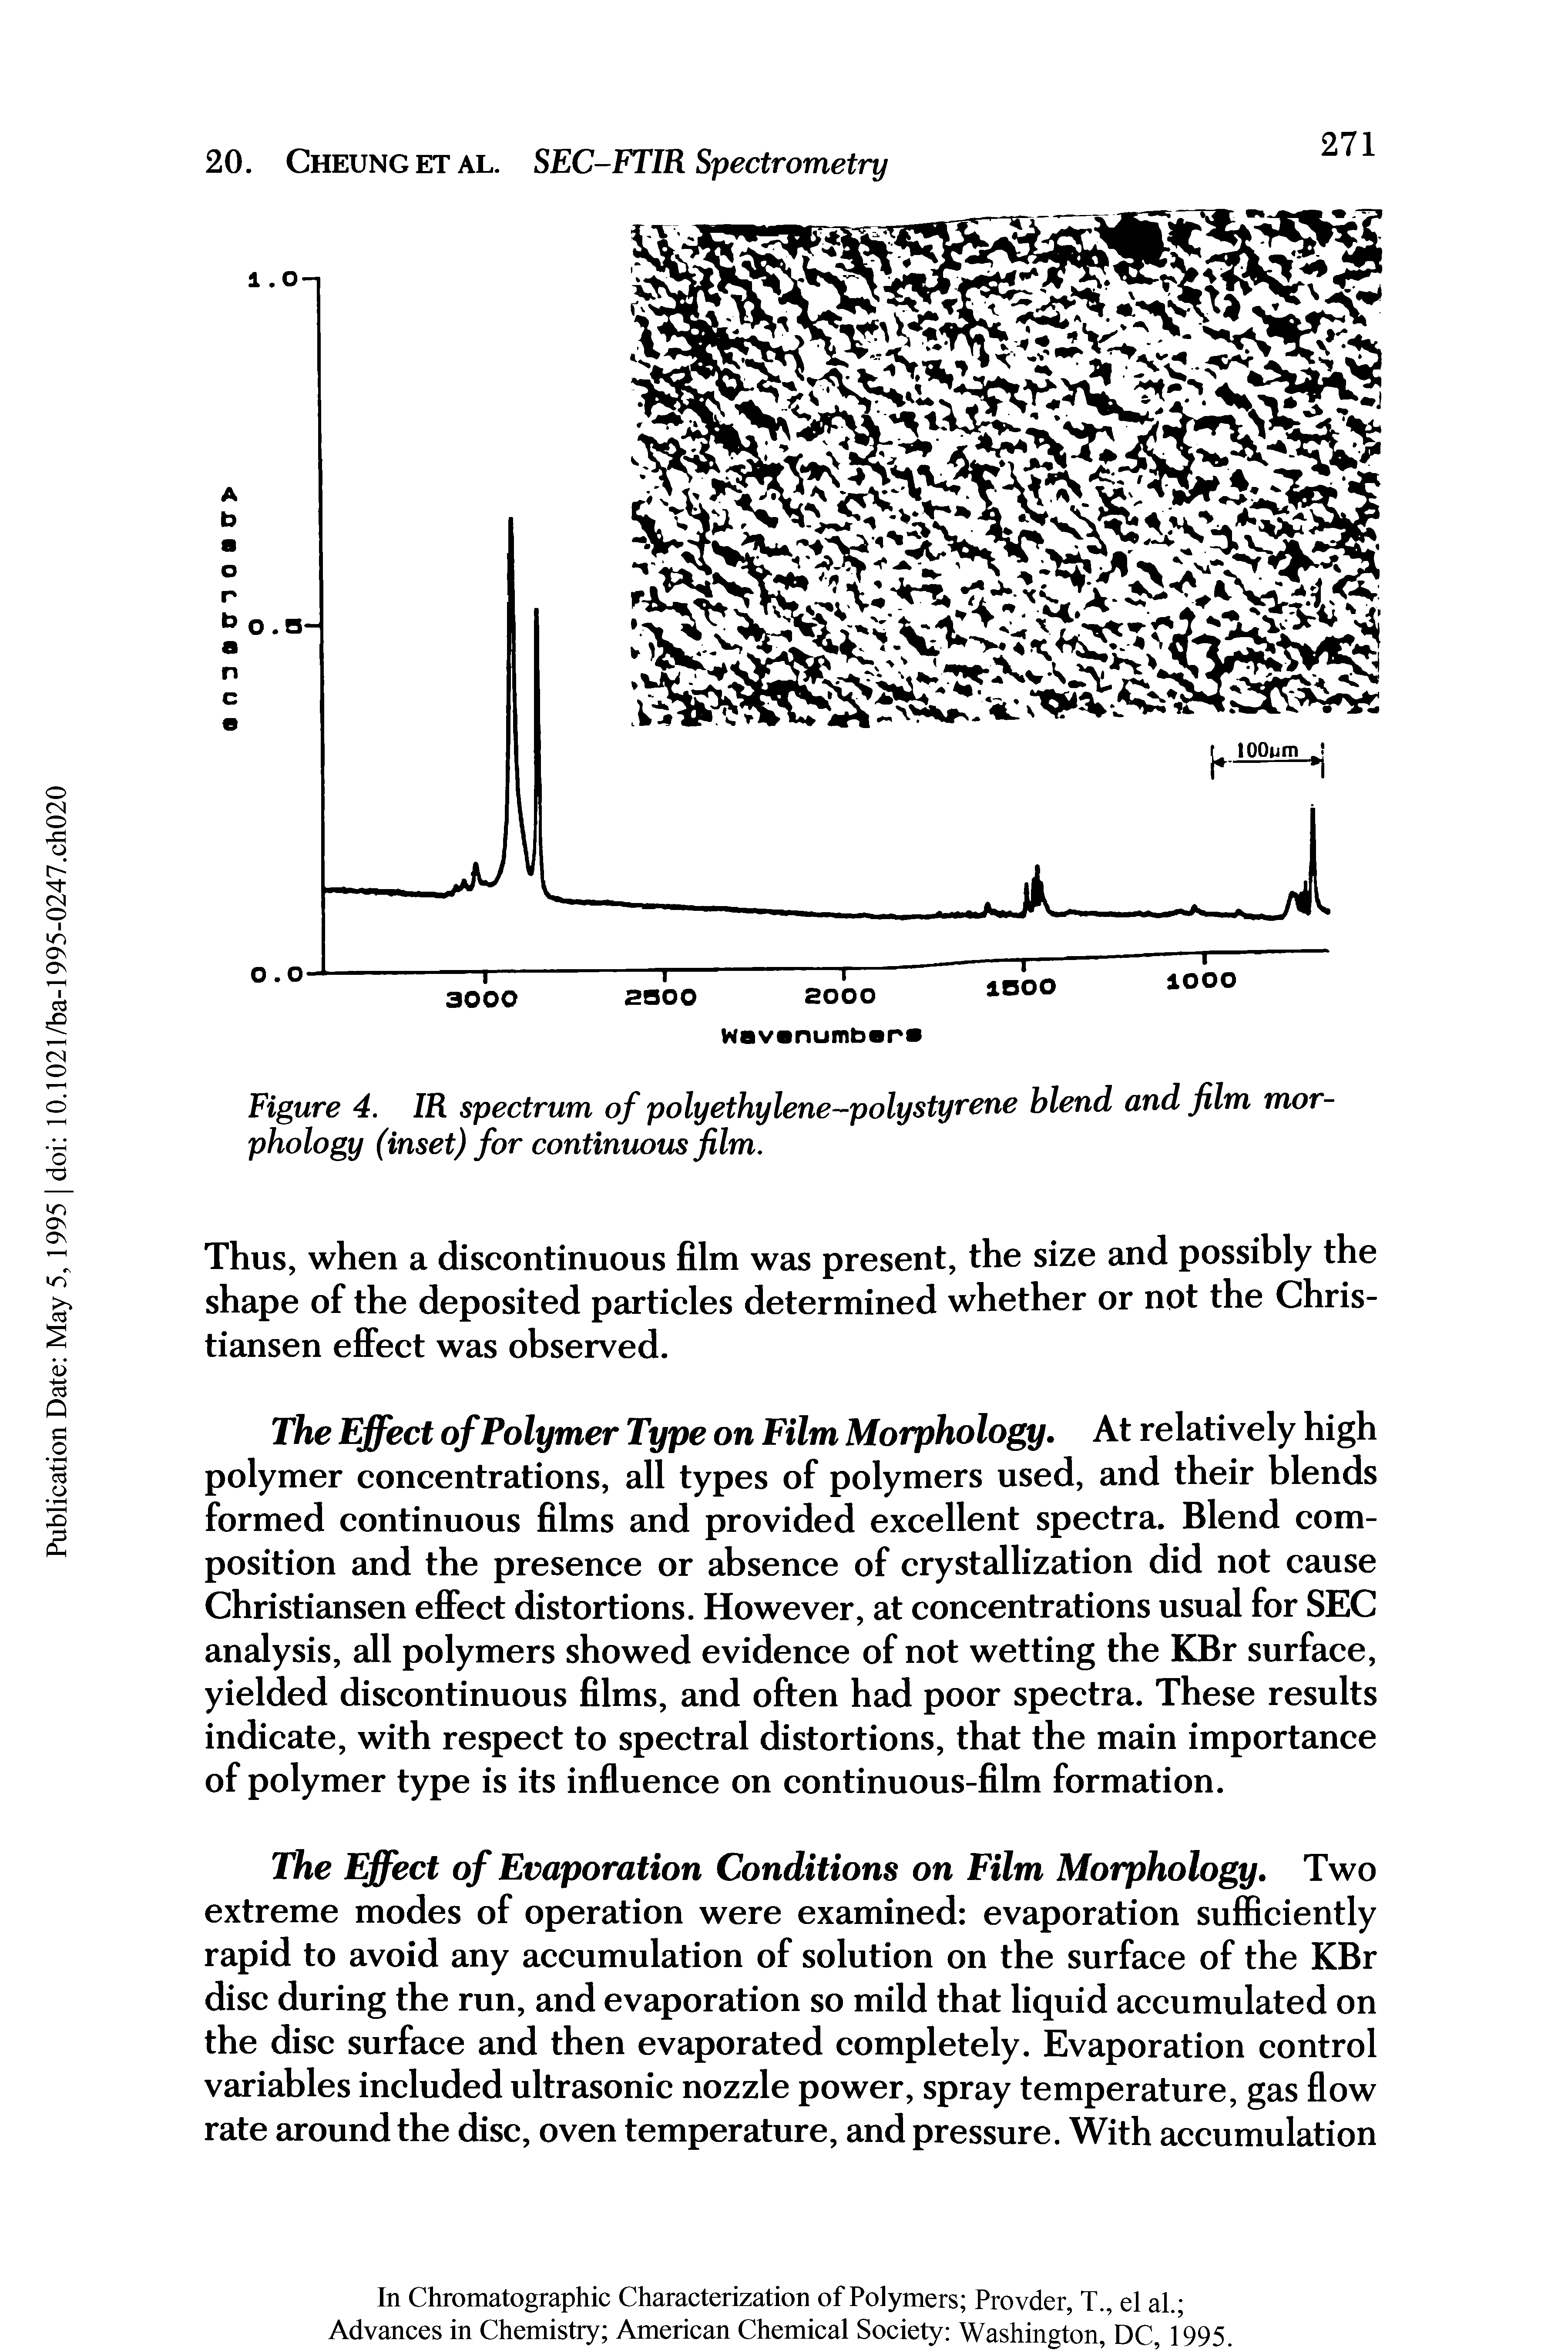 Figure 4. IR spectrum of polyethylene-polystyrene blend and film morphology (inset) for continuous film.